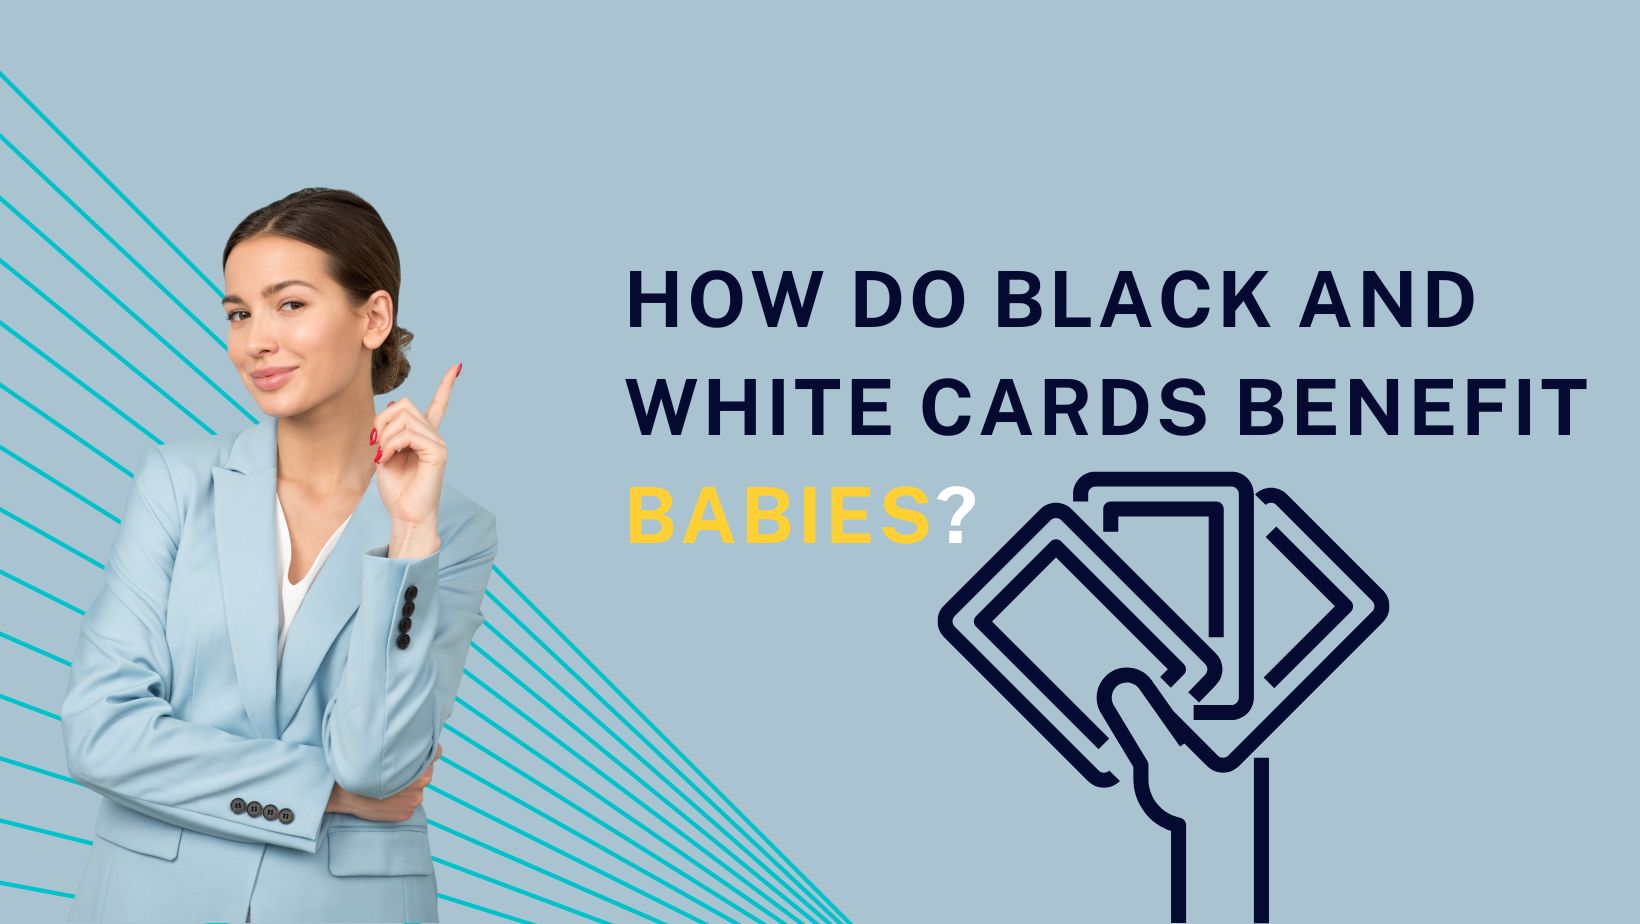 How do black and white cards benefit babies?